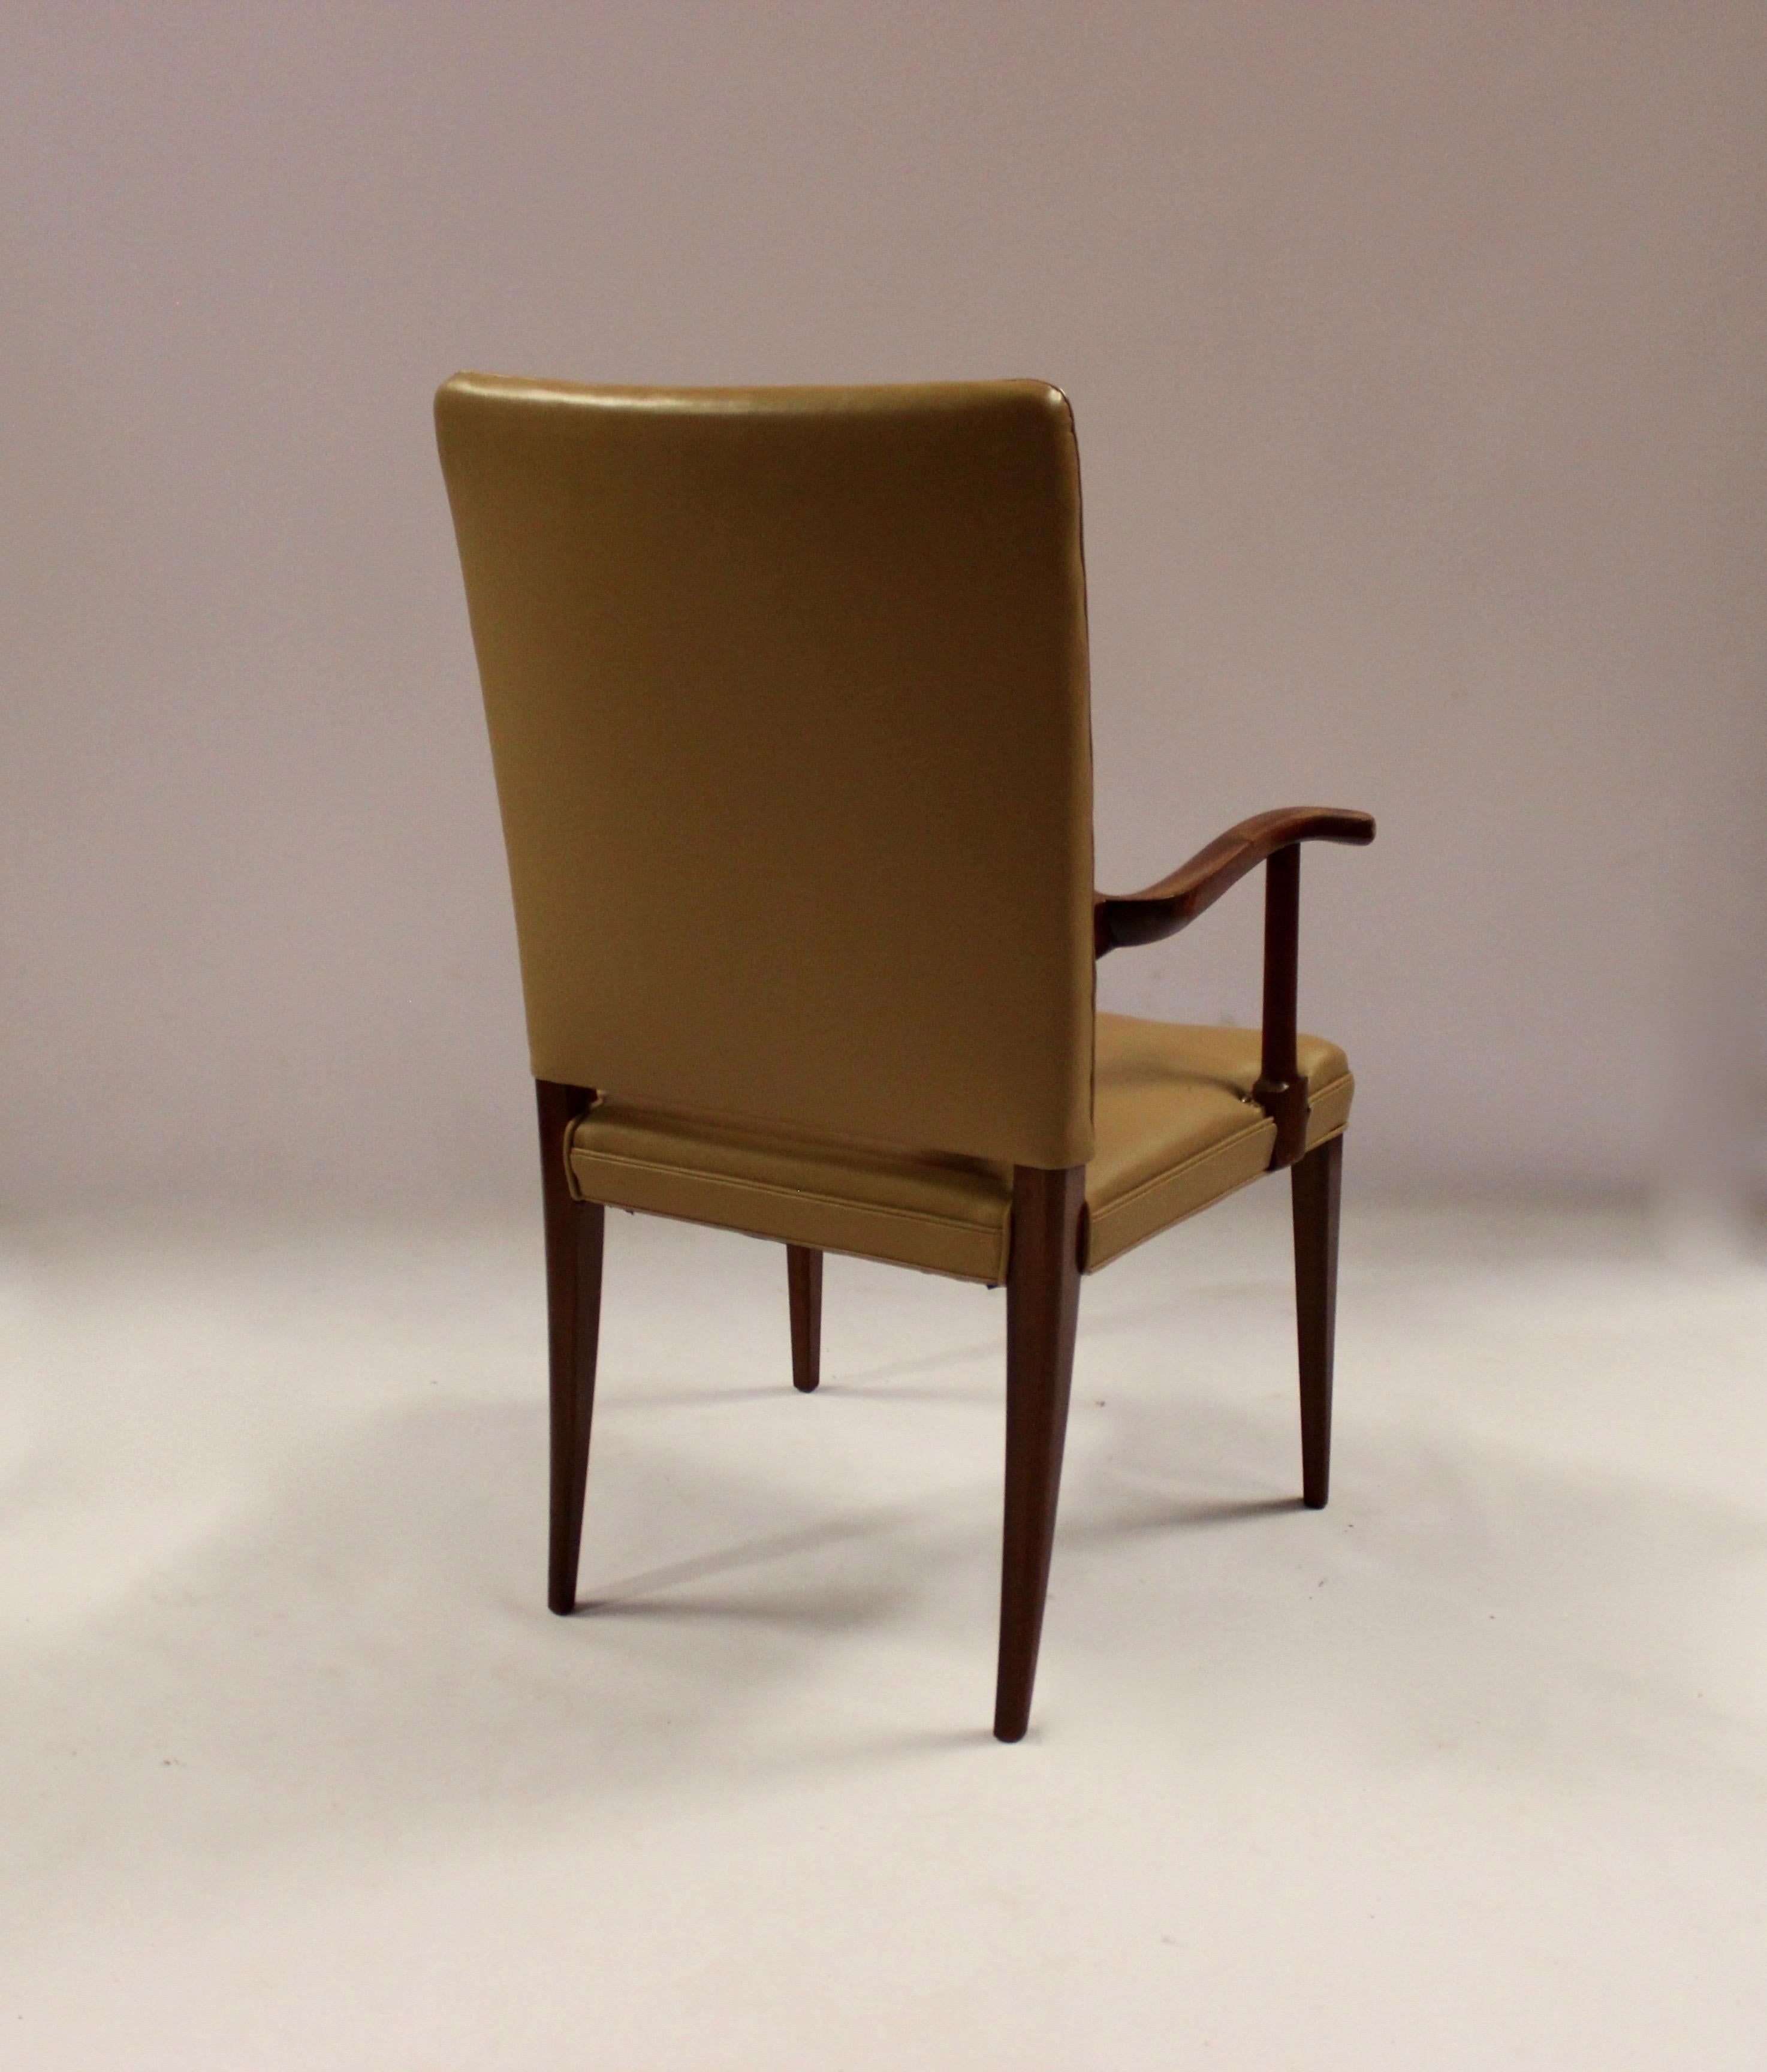 Scandinavian Modern Armchair in Mahogany and Light Leather by Jacob Kjær from the 1950s For Sale